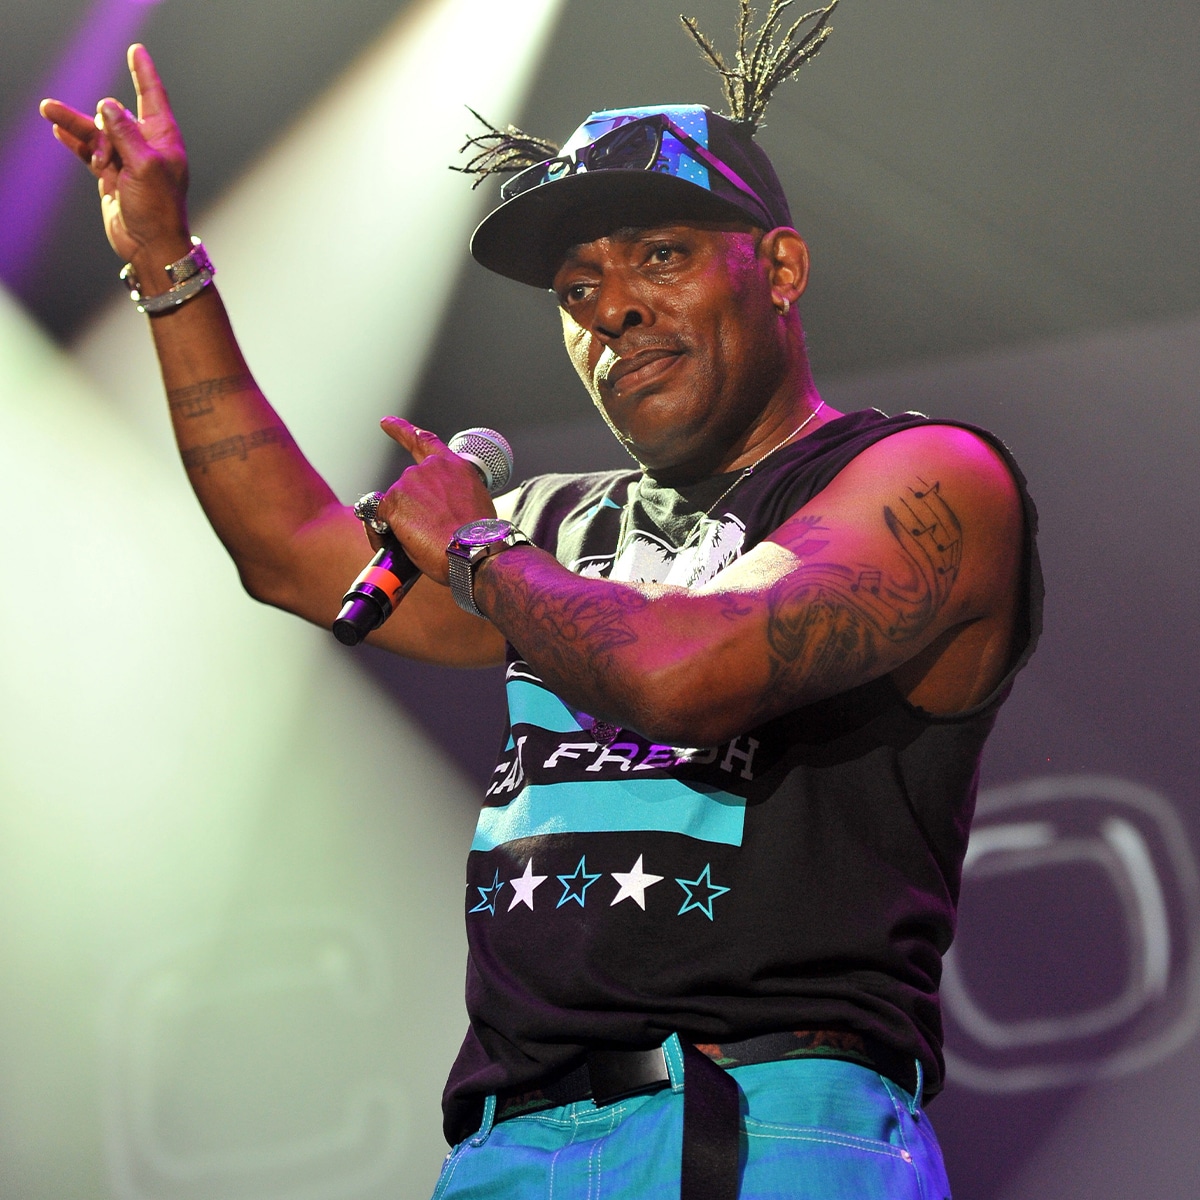 Rapper Coolio, who won Grammys for his songs Gangsta’s Paradise and Fantastic Voyage, passes away at age 59.